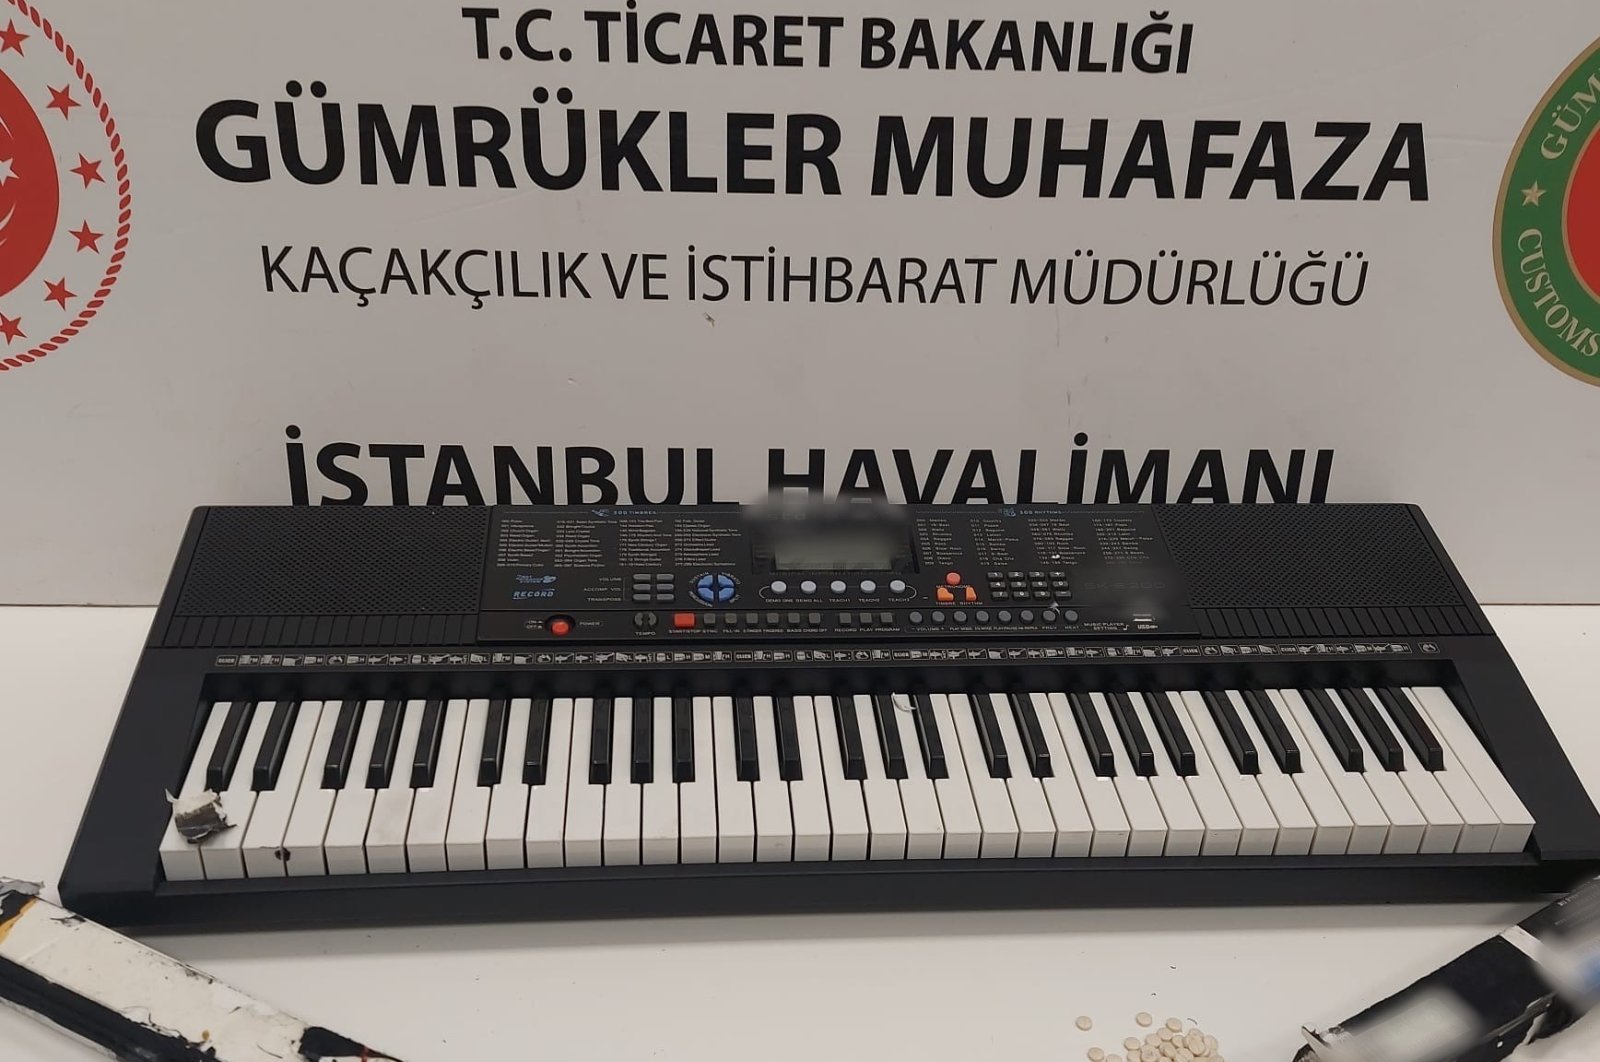 The keyboard and drugs that were seized at Istanbul Airport, Türkiye, May 18, 2023. (DHA Photo)